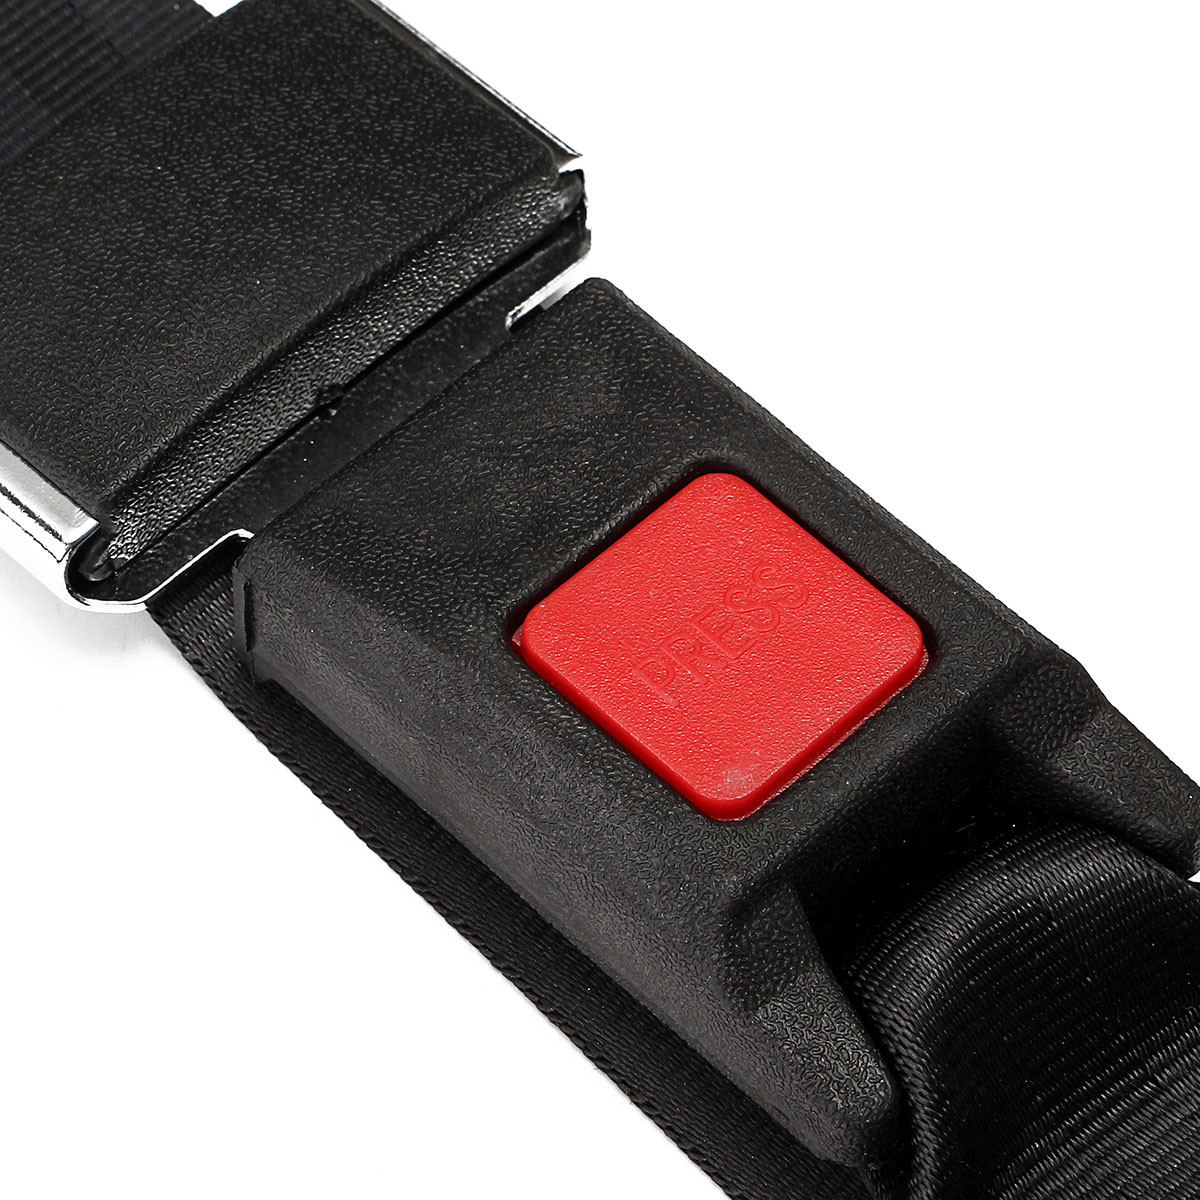 3-Point-Black-Safety-Seat-Belt-For-Racing-Karting-Go-Kart-Parts-Cart-Auto-Car-1116681